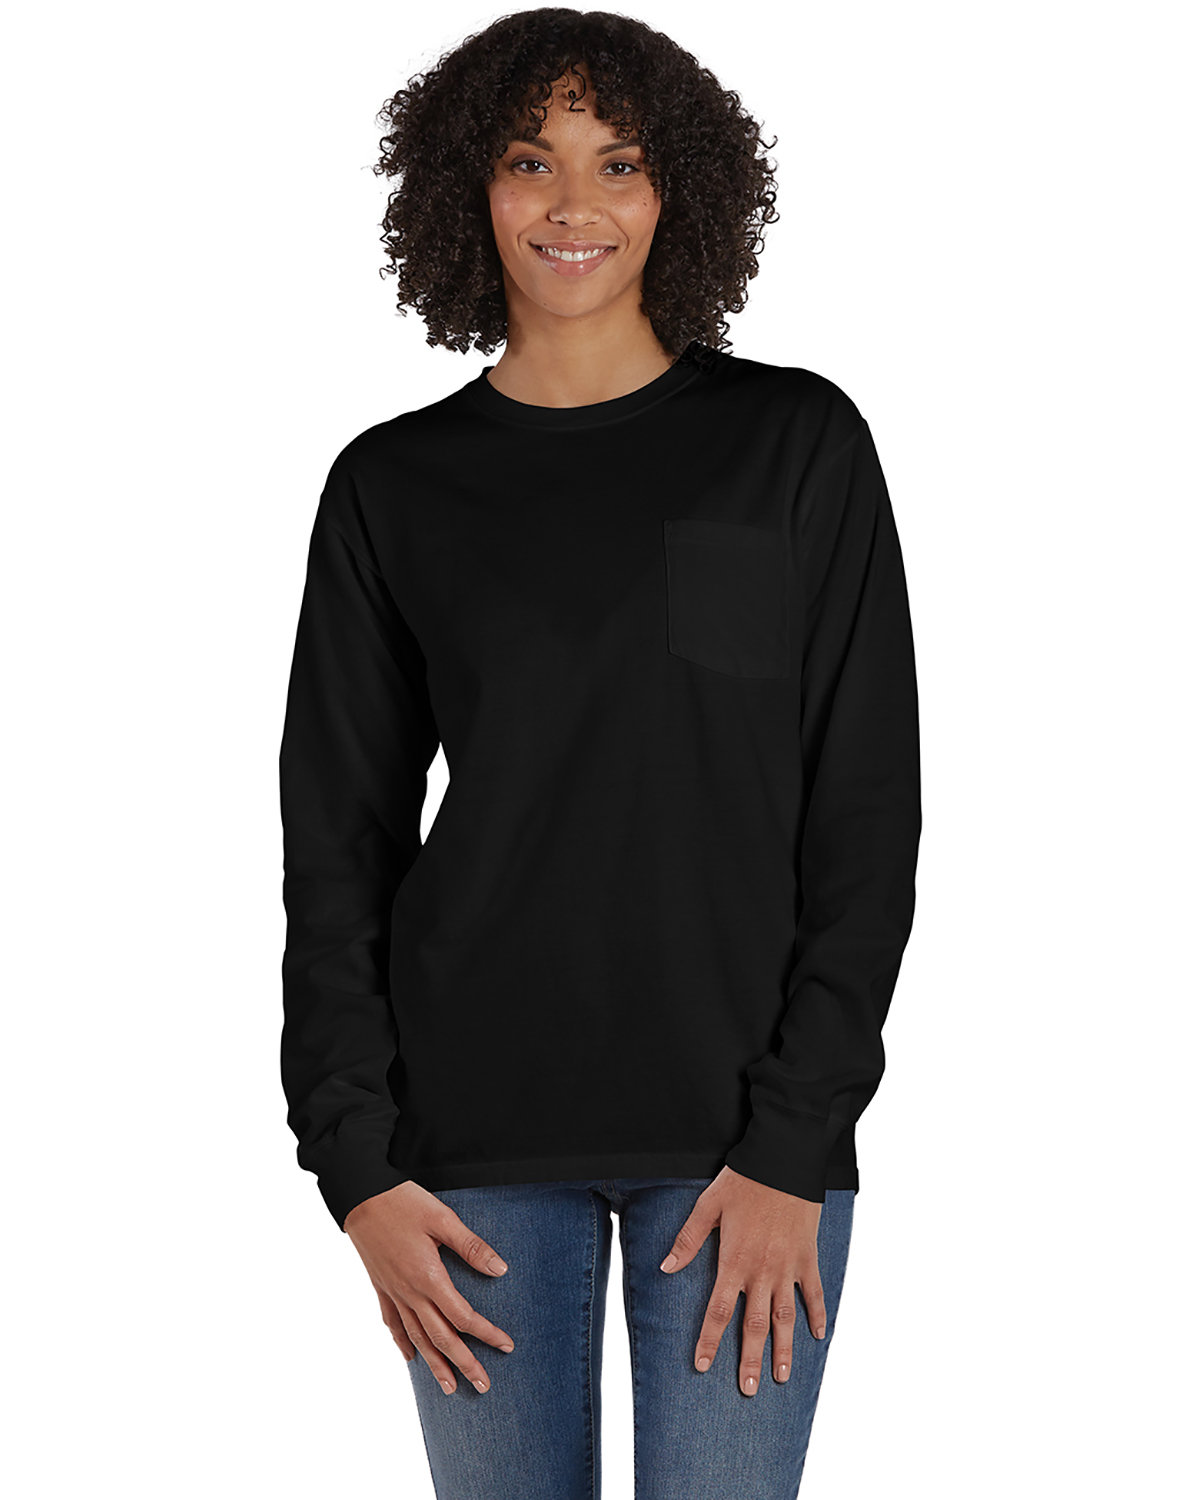 ComfortWash by Hanes Unisex Garment-Dyed Long-Sleeve T-Shirt with Pocket BLACK 